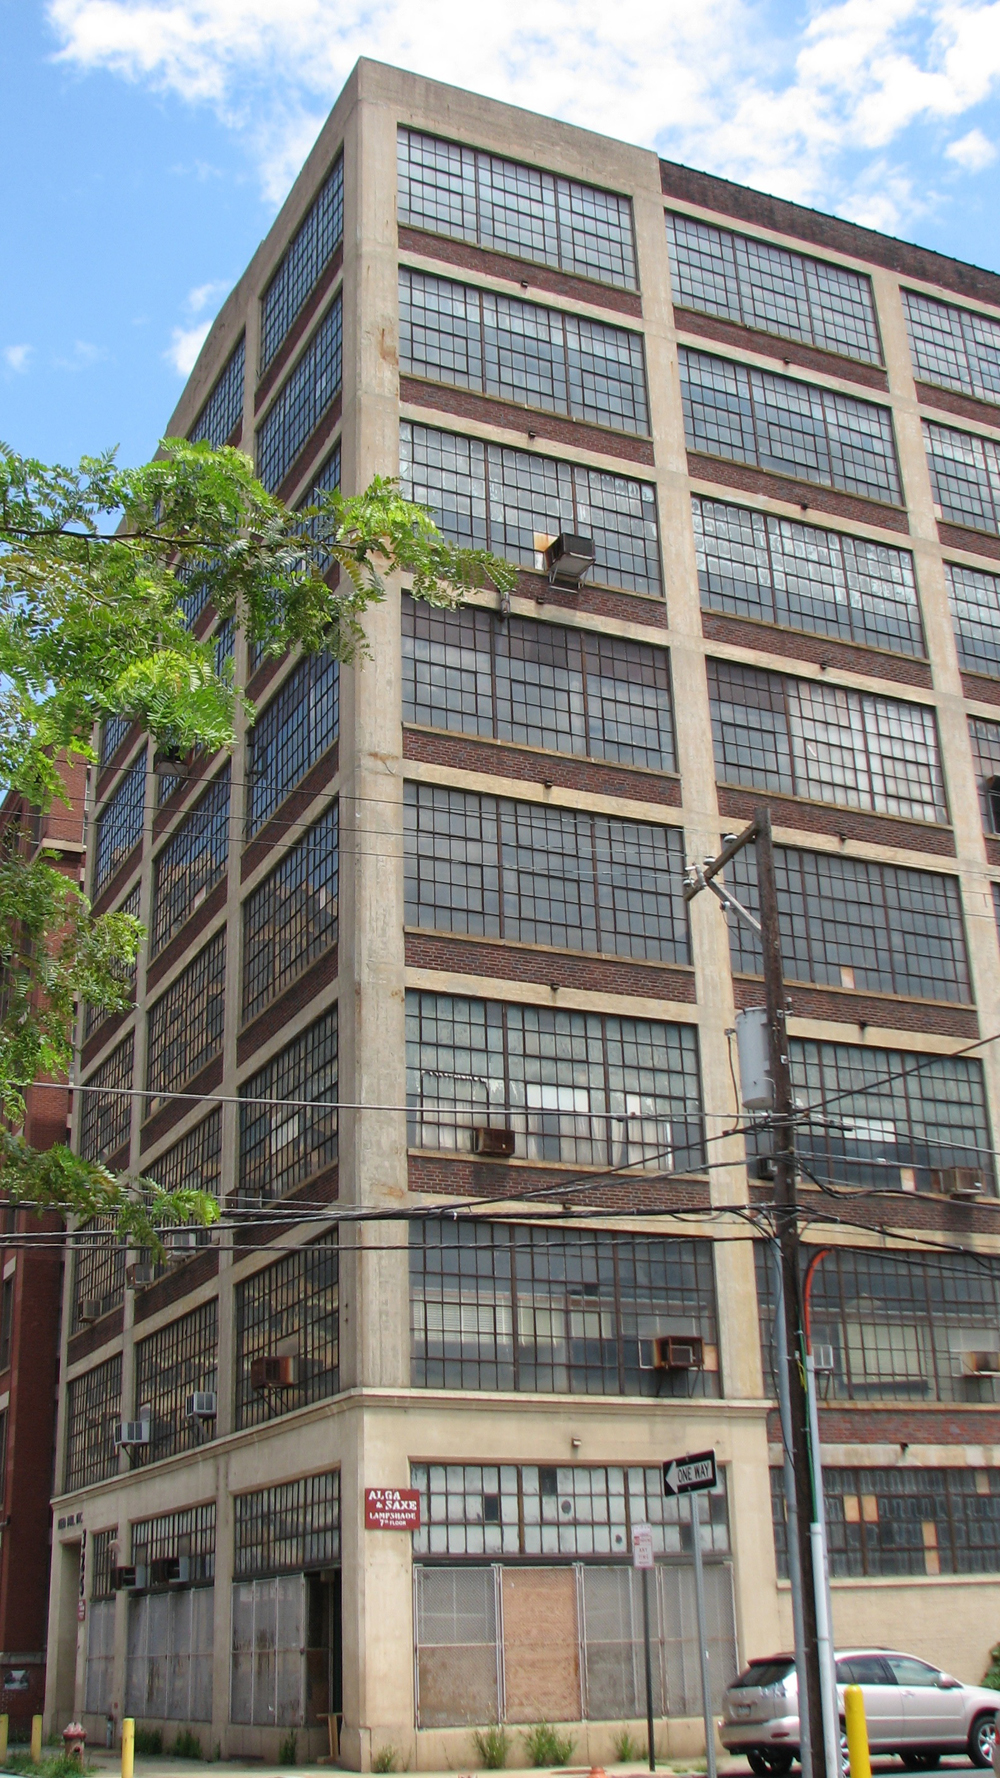 The Heid Building, designed by J. Franklin Stuckert, exemplifies 1920s concrete and steel industrial architecture. 